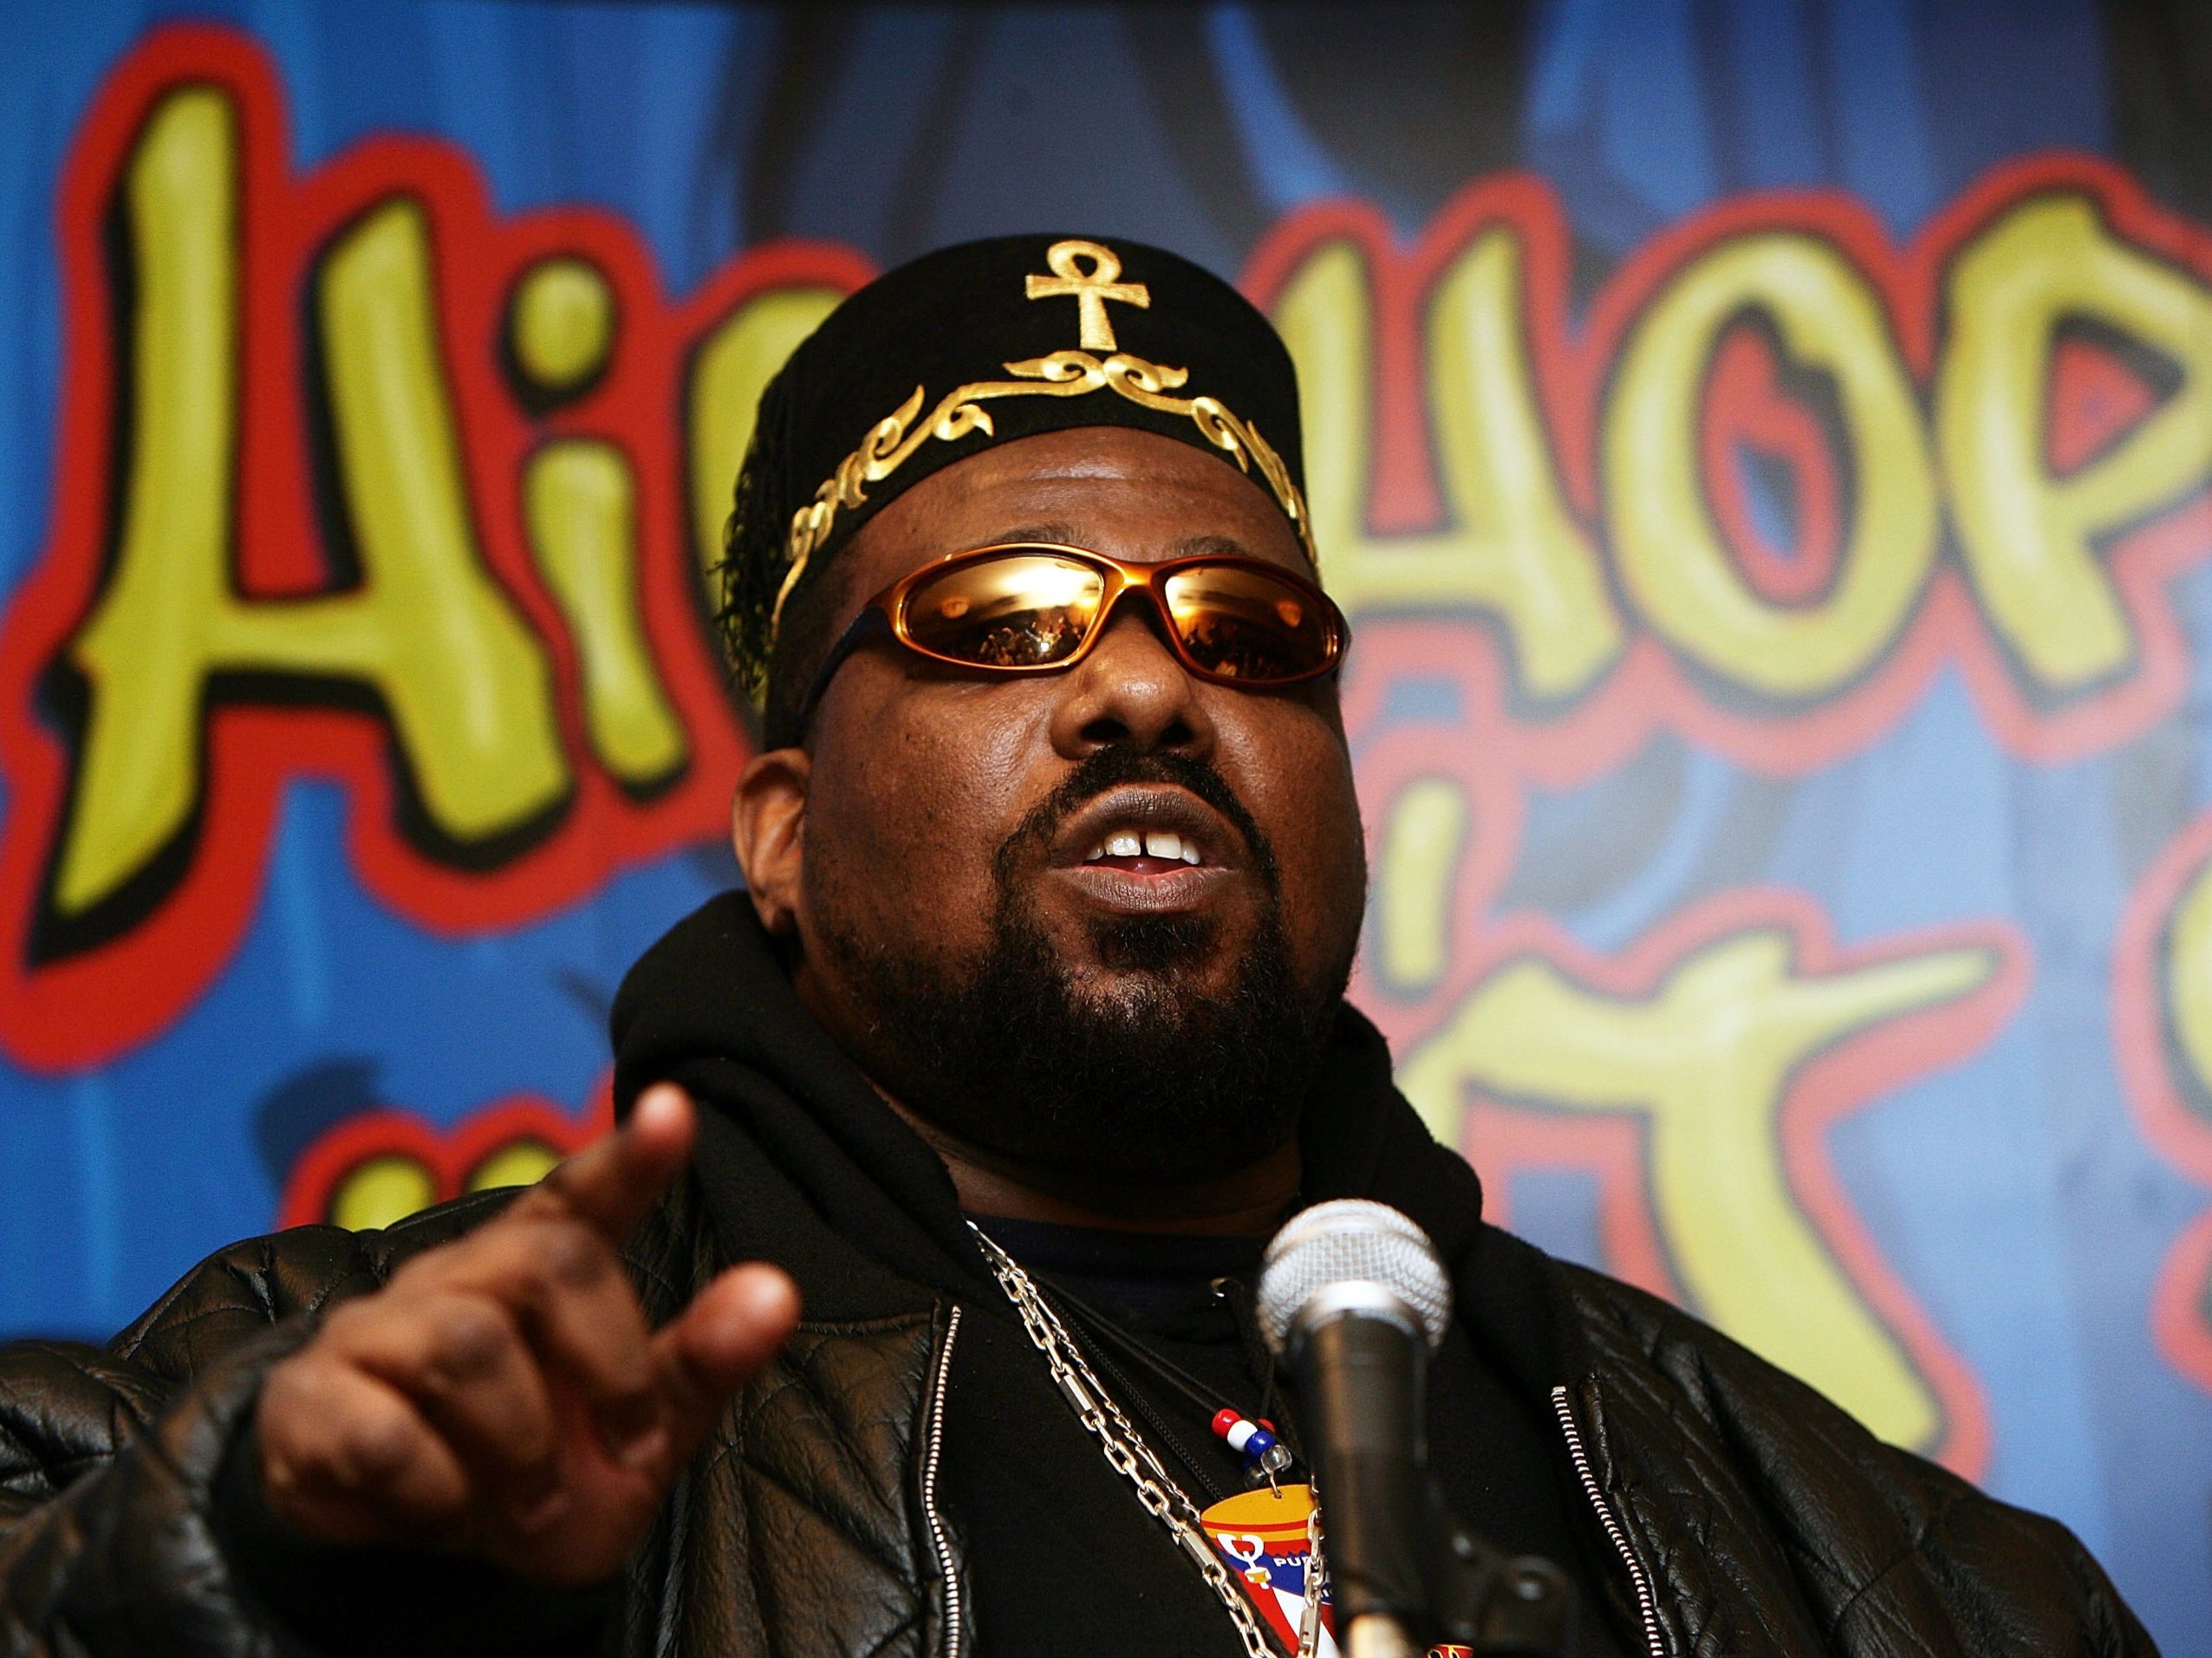 Afrika Bambaataa is shown in the new documentary – but without mention of the serious allegations against him